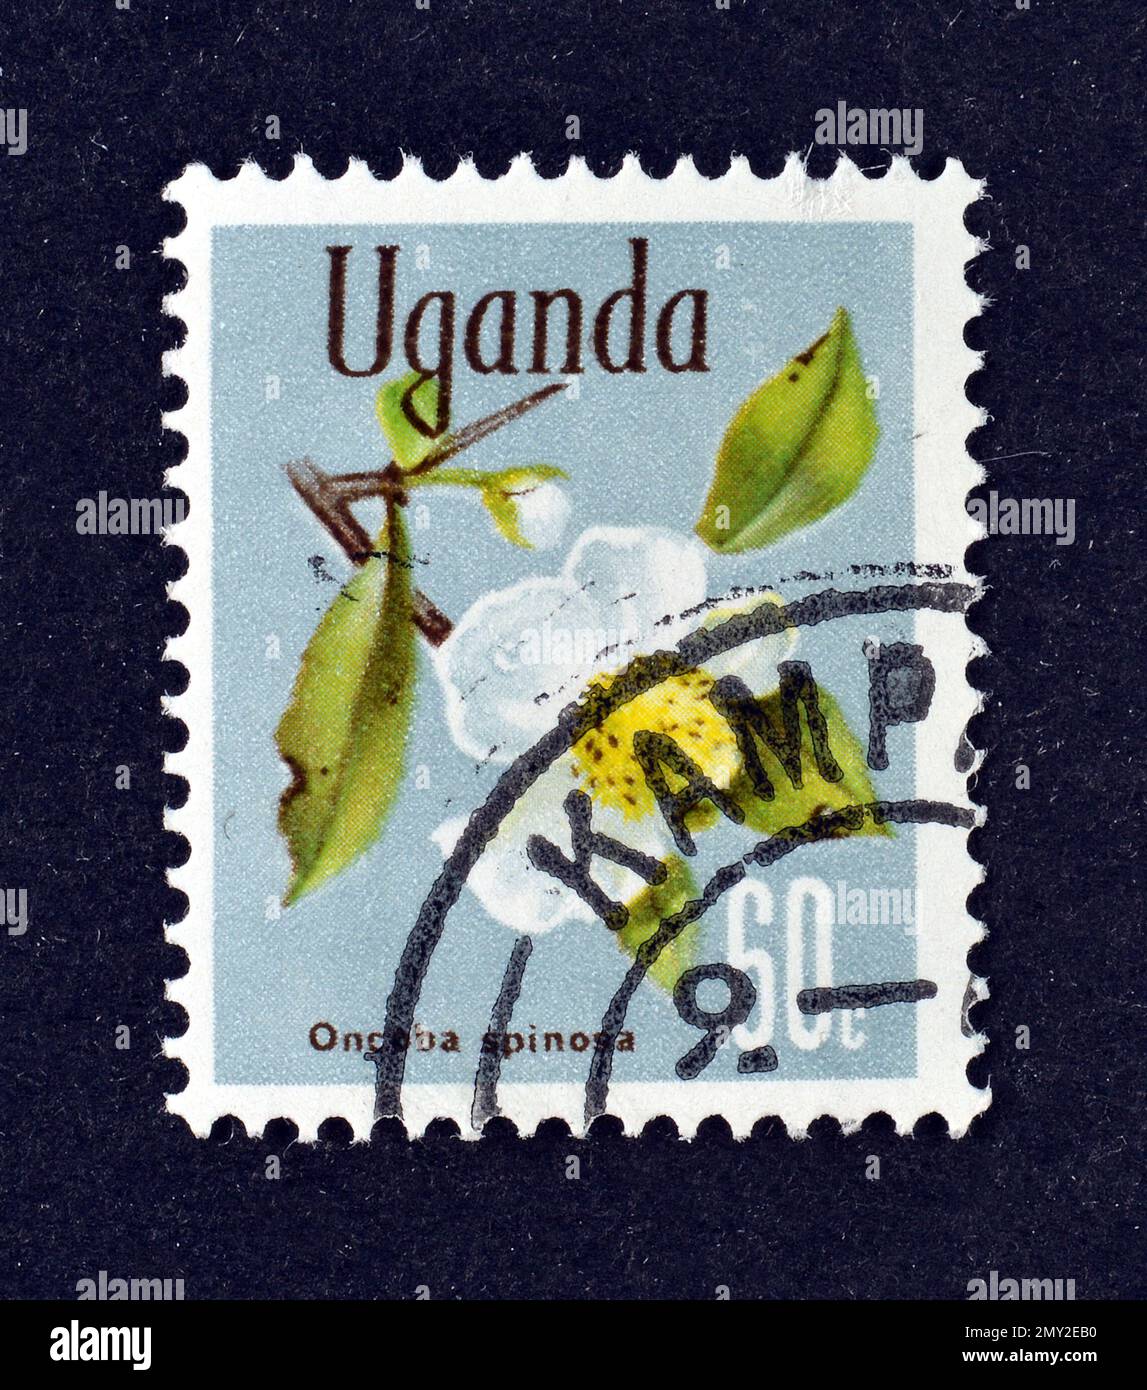 Cancelled postage stamp printed by Uganda, that shows Snuff-box tree (Oncoba spinosa), Native Flora, circa 1969. Stock Photo